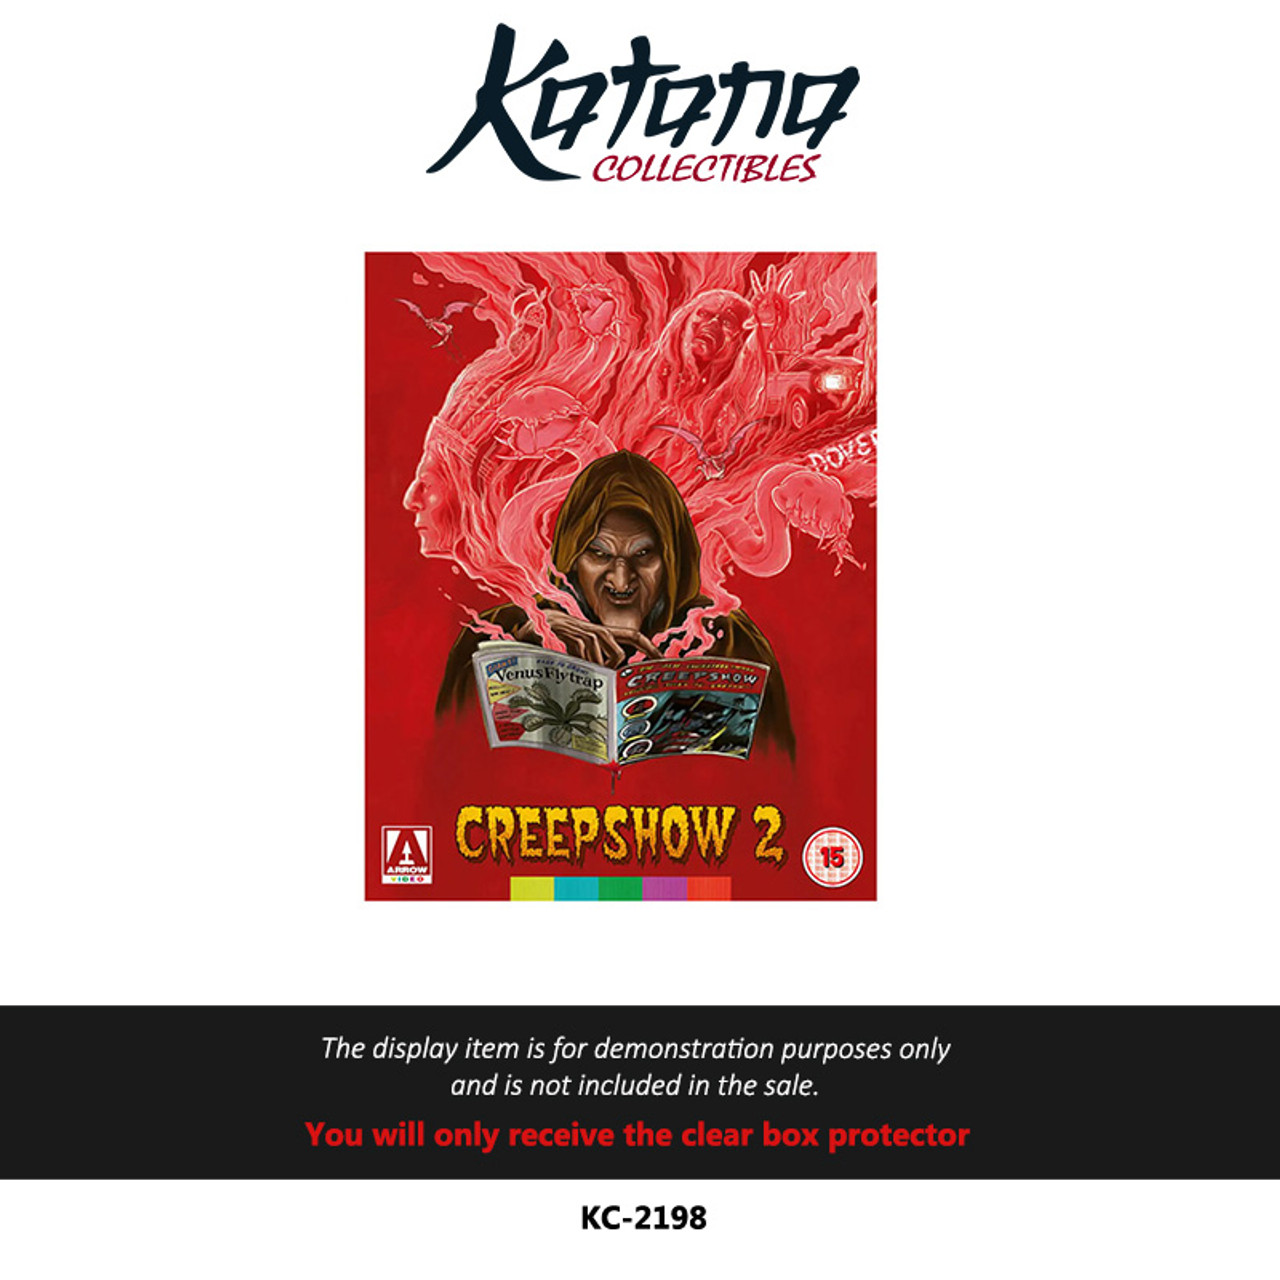 Katana Collectibles Protector For Arrow Films Creepshow 2 Limited Edition Steelbook